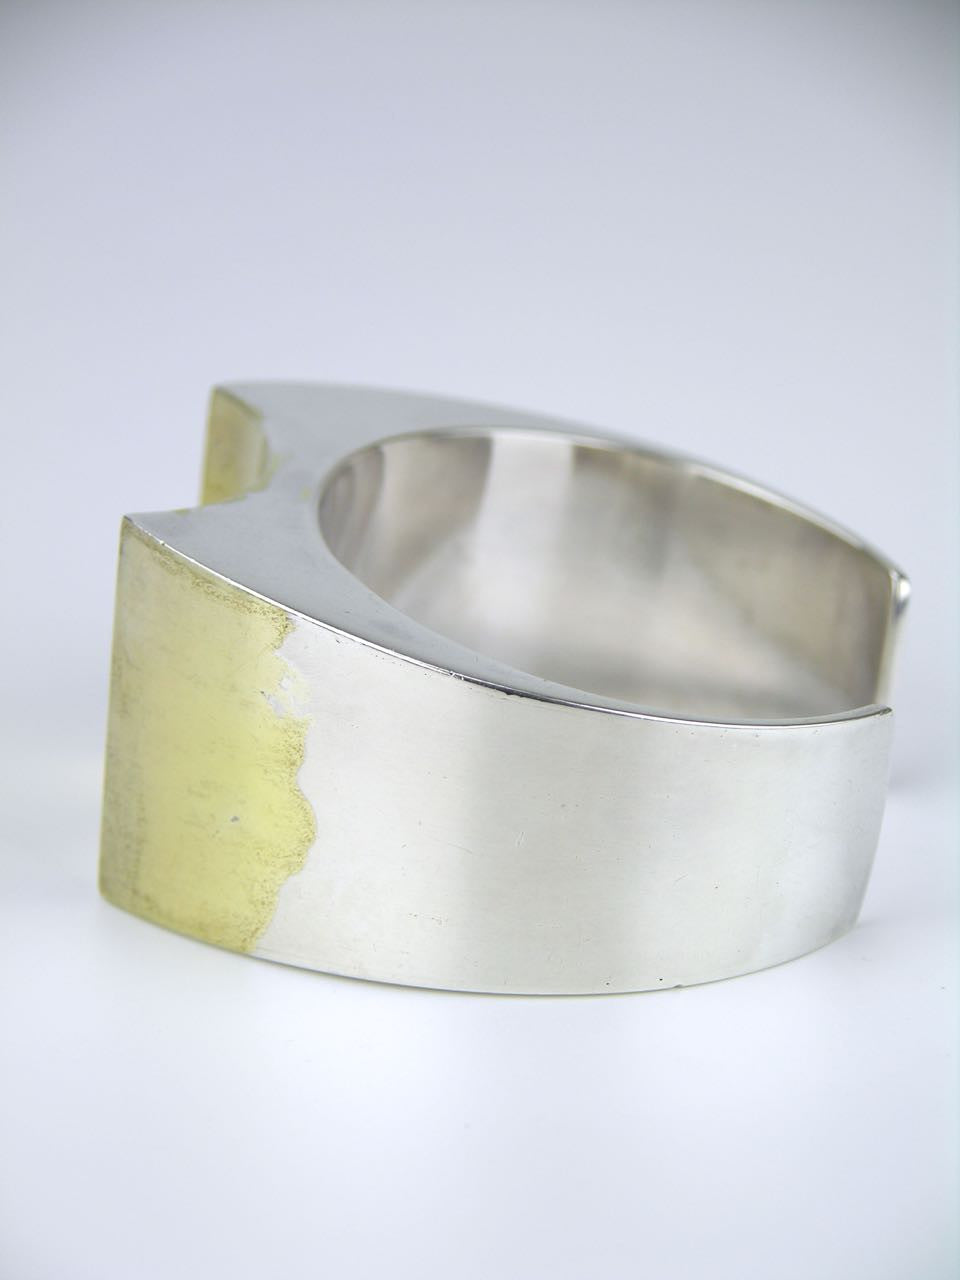 Vagn Hemmingsen silver and fire gilded cuff